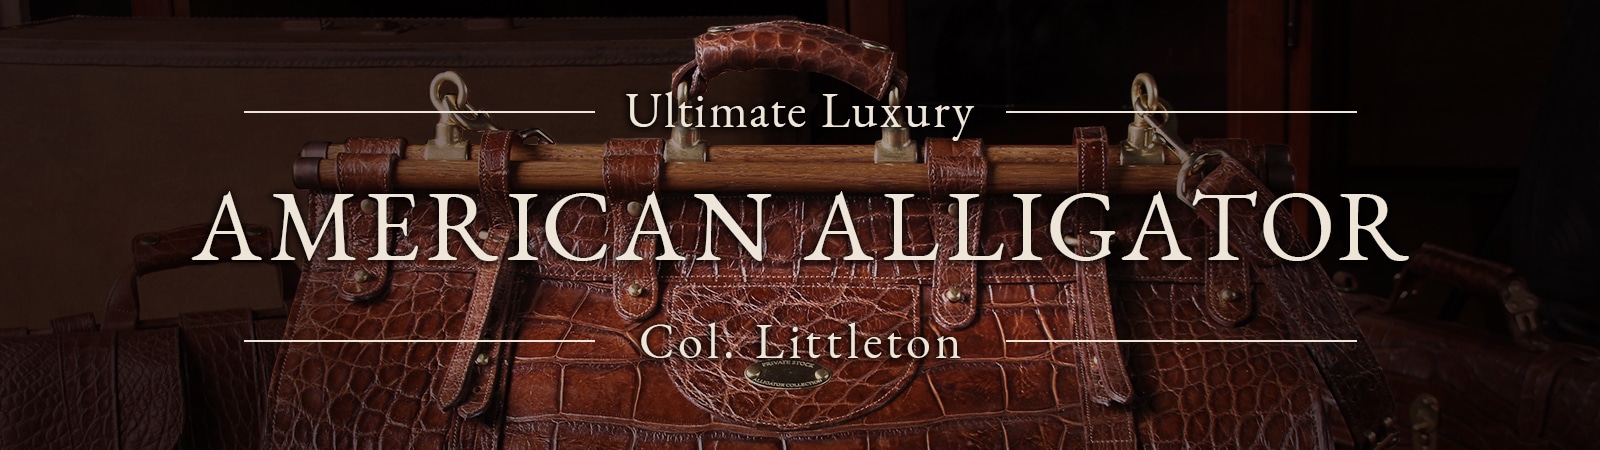 Ultimate Luxury - American Alligator - Col. Littleton Product category image for American Alligator, featuring a close-cropped photo of the top of an Alligator No. 3 Grip Travel Bag